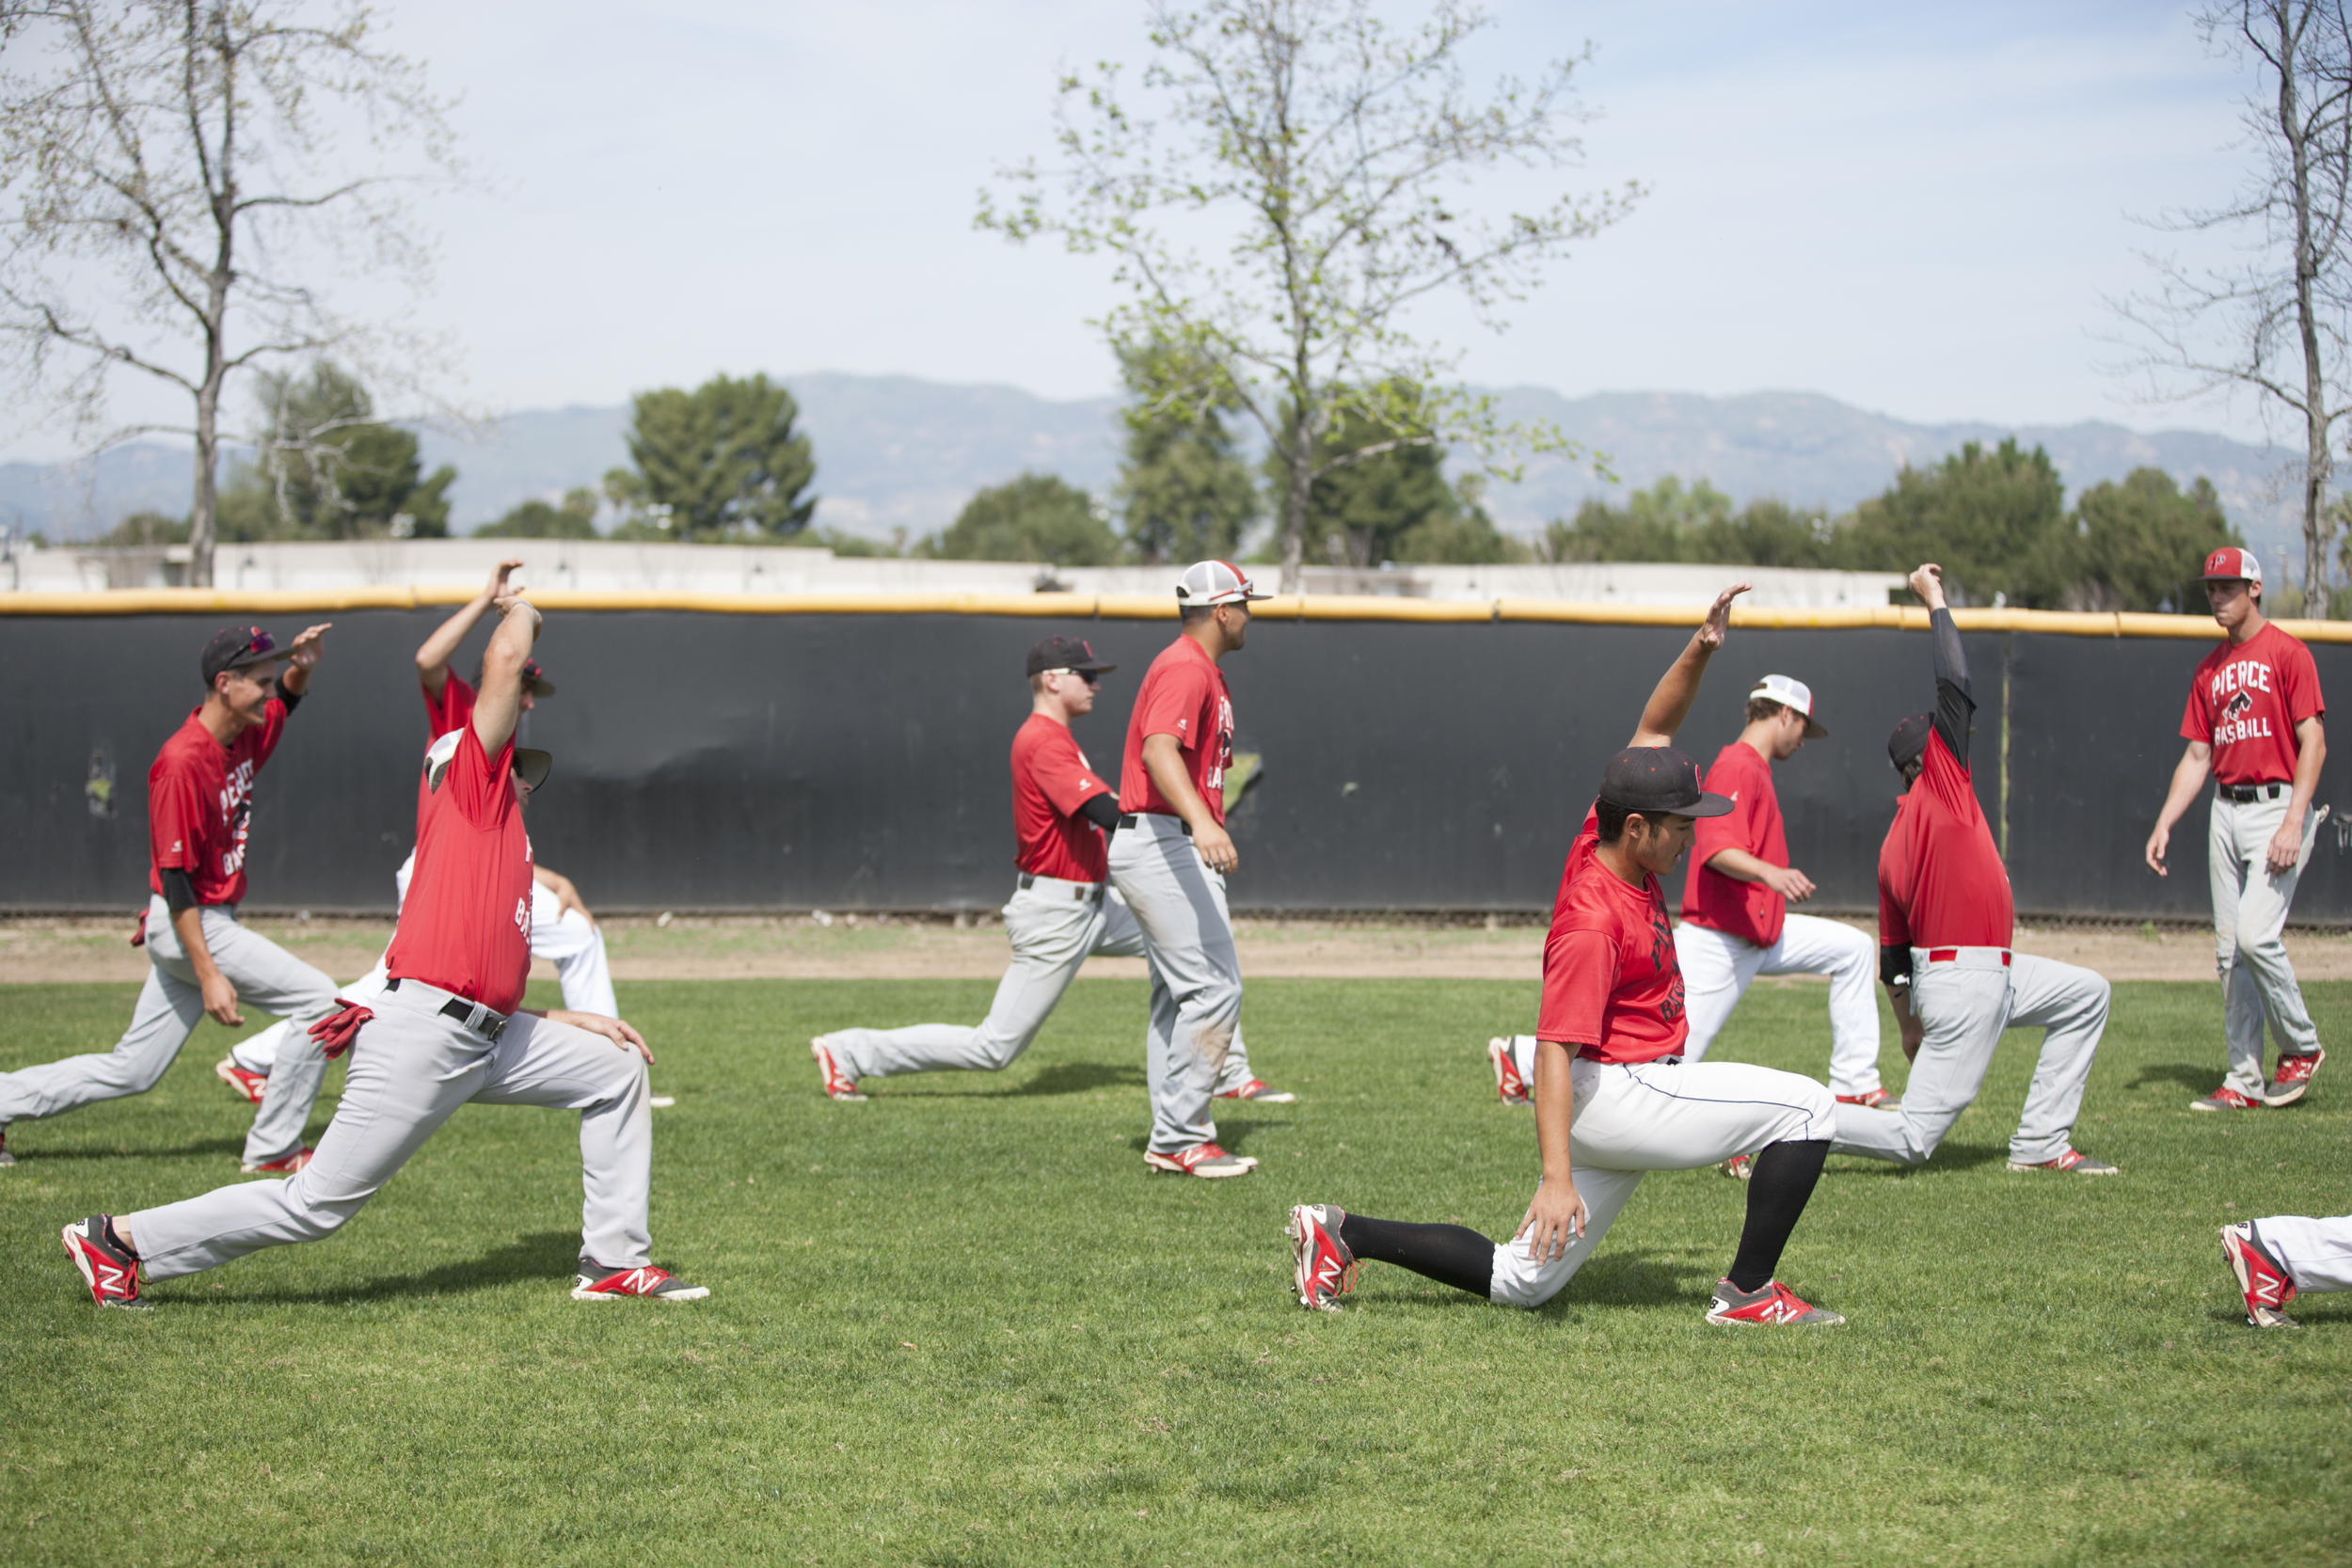  Members of Pierce College's baseball team stretch at Joe Kelly Field before practice on Tuesday, March 10, 2015. Woodland Hills, Calif.  Read the full story&nbsp; here  